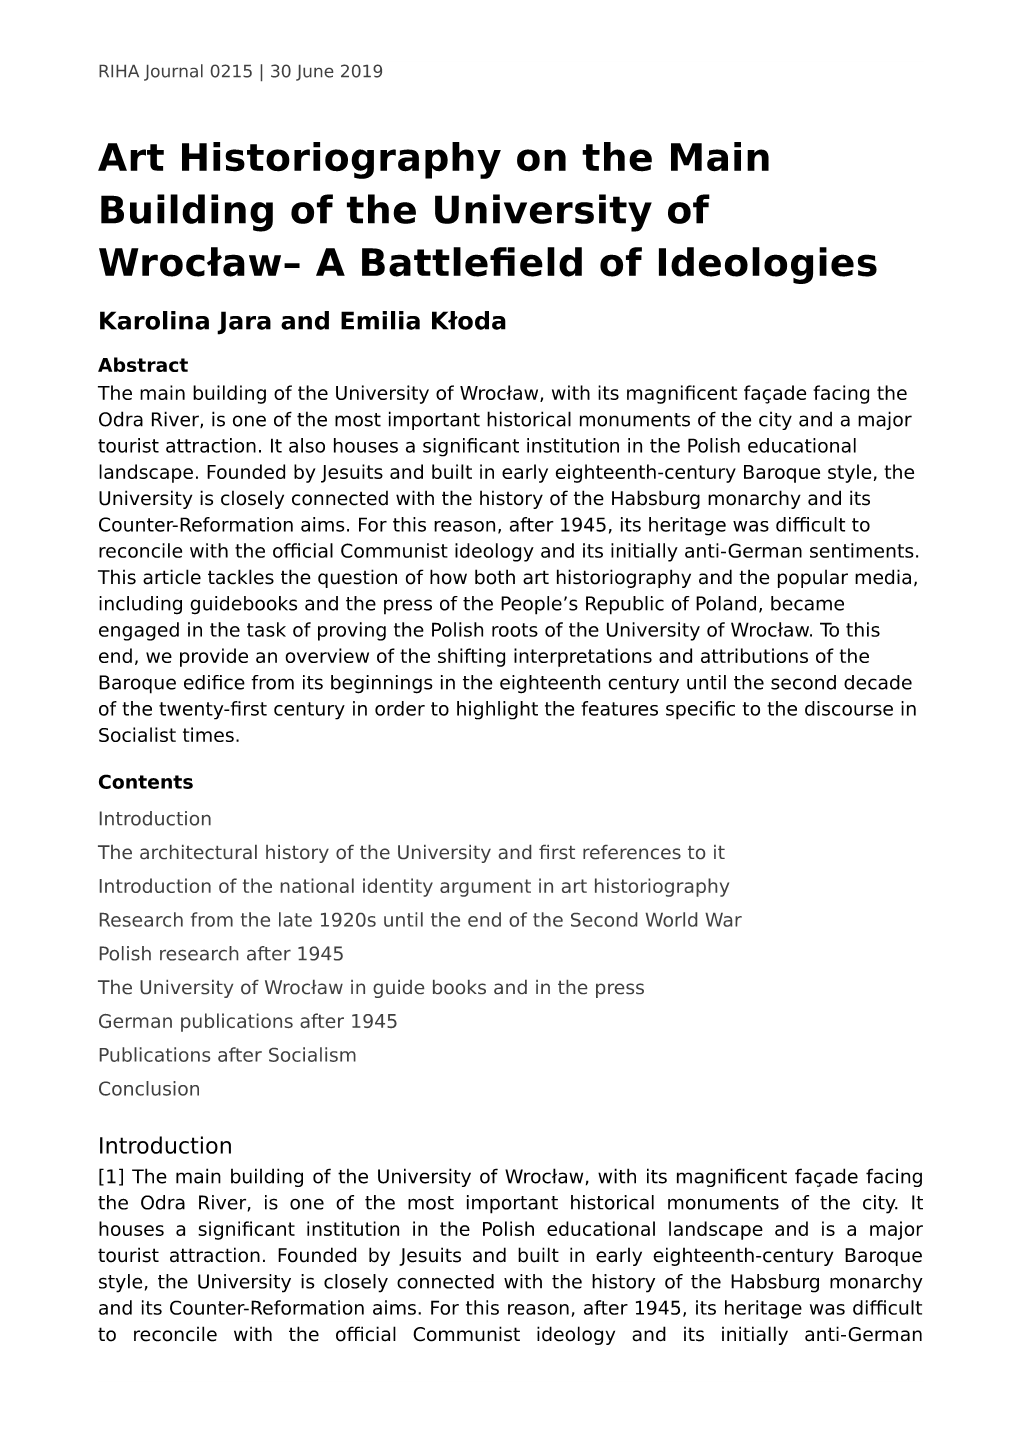 Art Historiography on the Main Building of the University of Wrocław– a Battlefeld of Ideologies